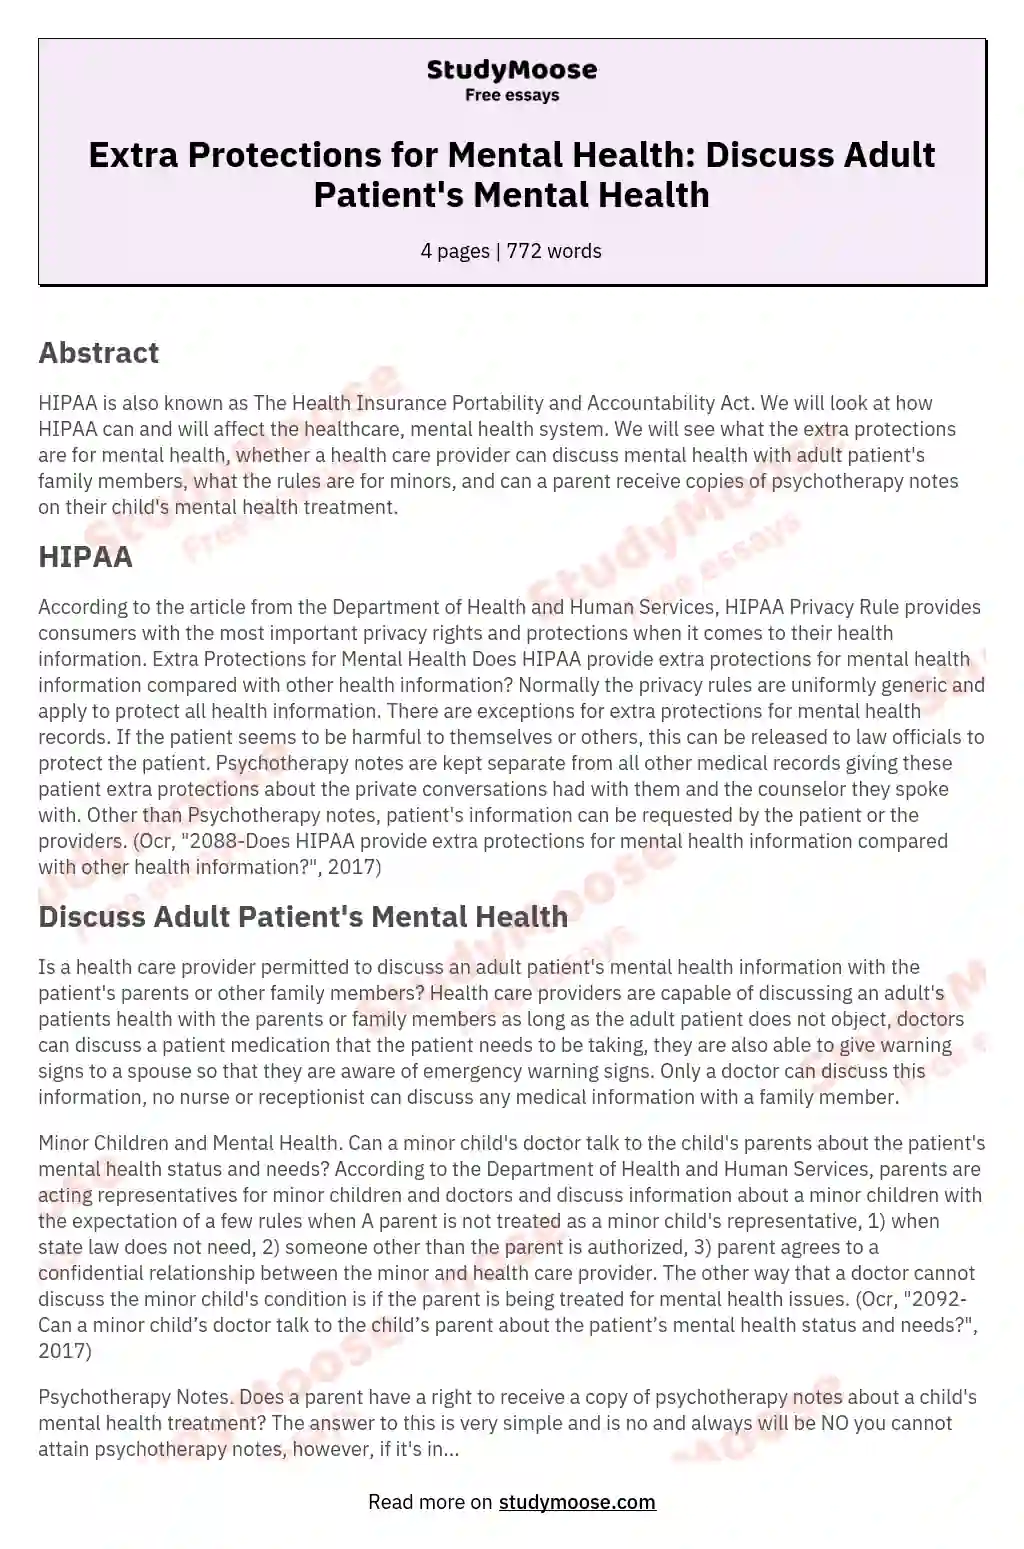 Extra Protections for Mental Health: Discuss Adult Patient's Mental Health